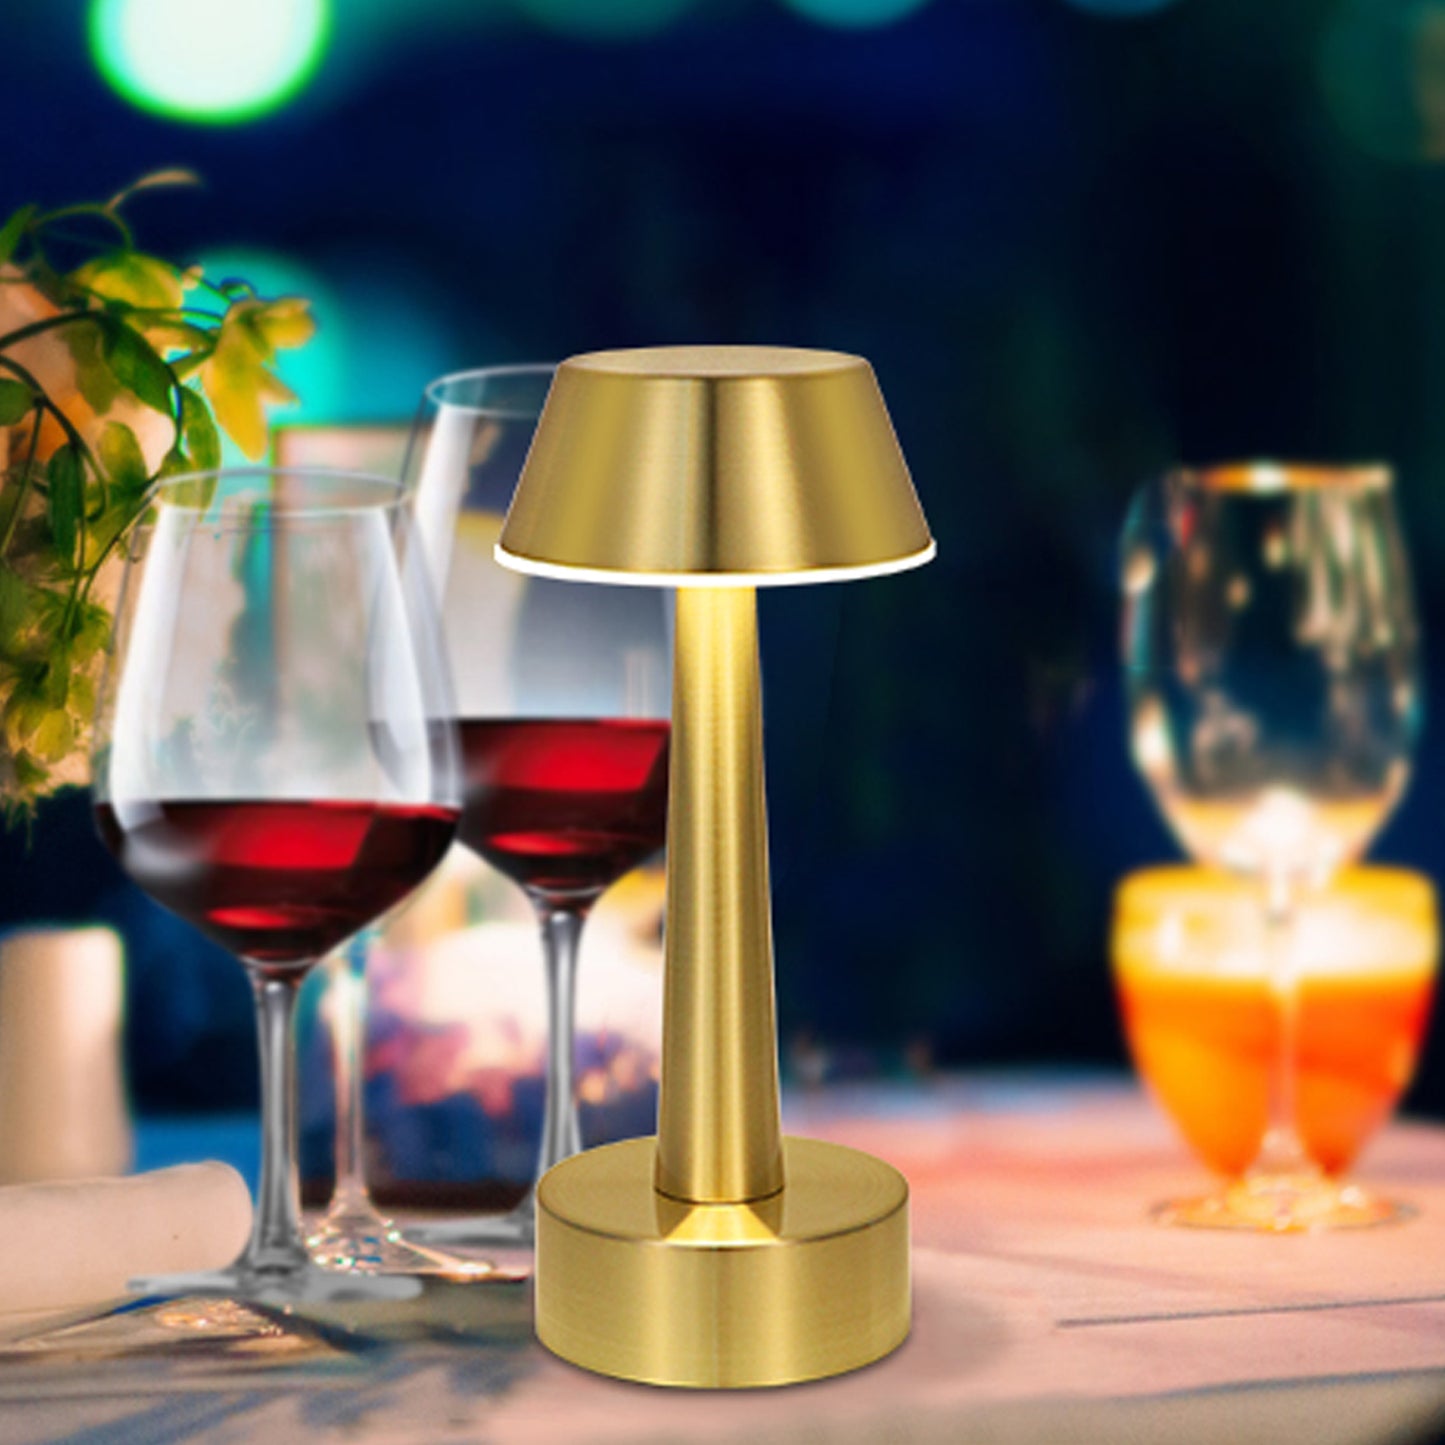 Cordless Table Lamp, Swan Gold